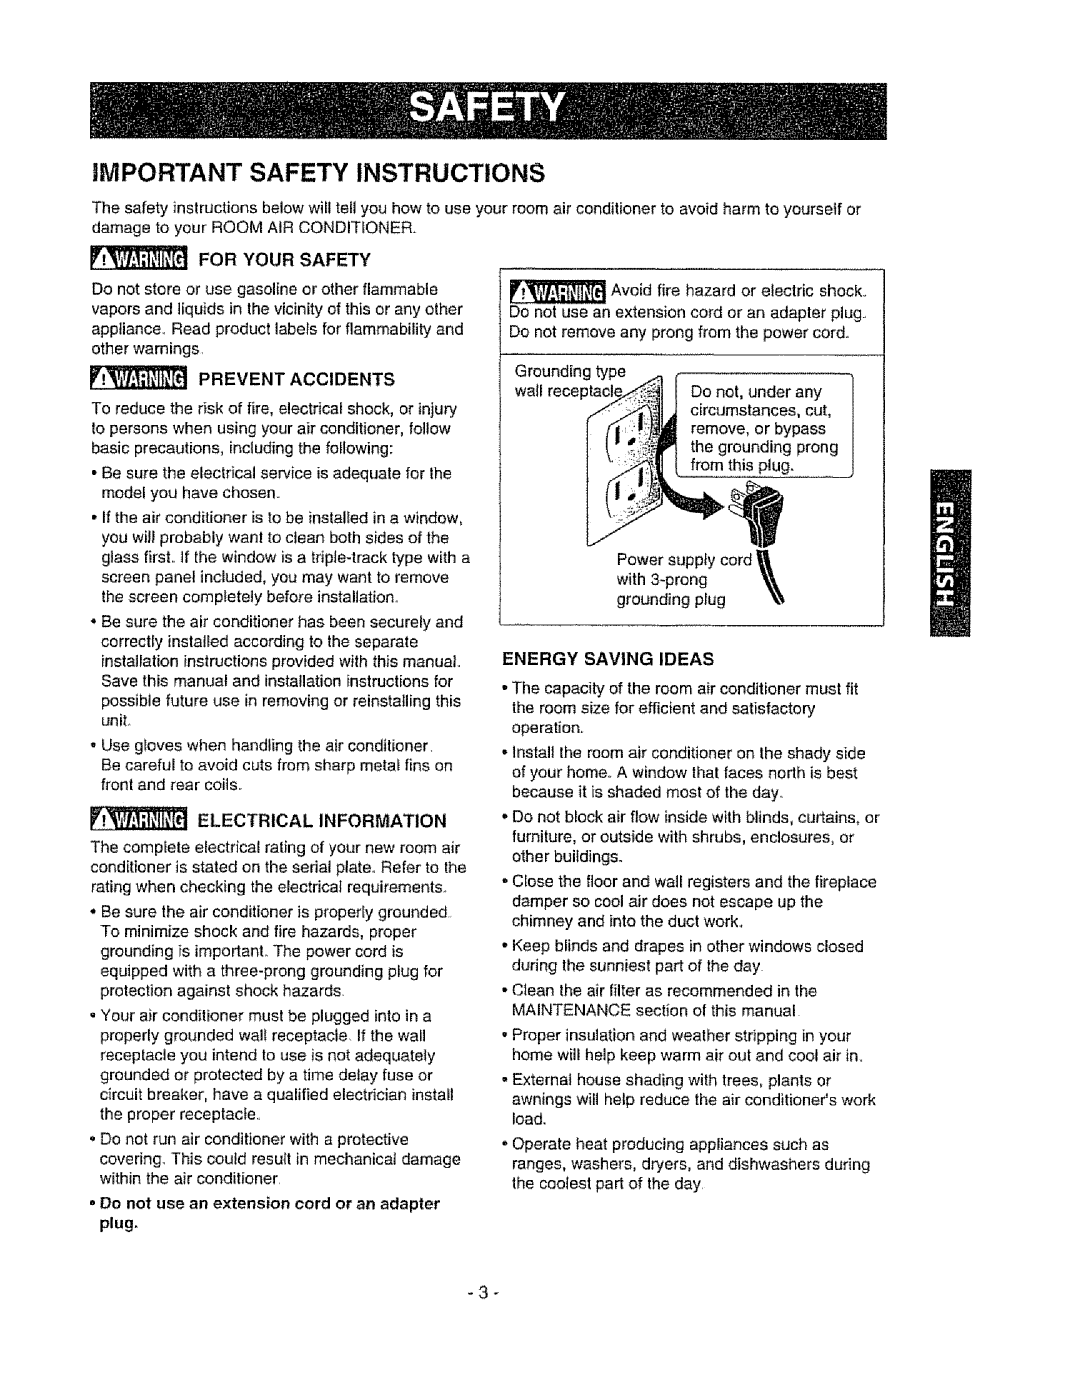 Kenmore 580. 72089 iMPORTANT SAFETY INSTRUCTIONS, before installation, installationinstructionsprovided with this manual 